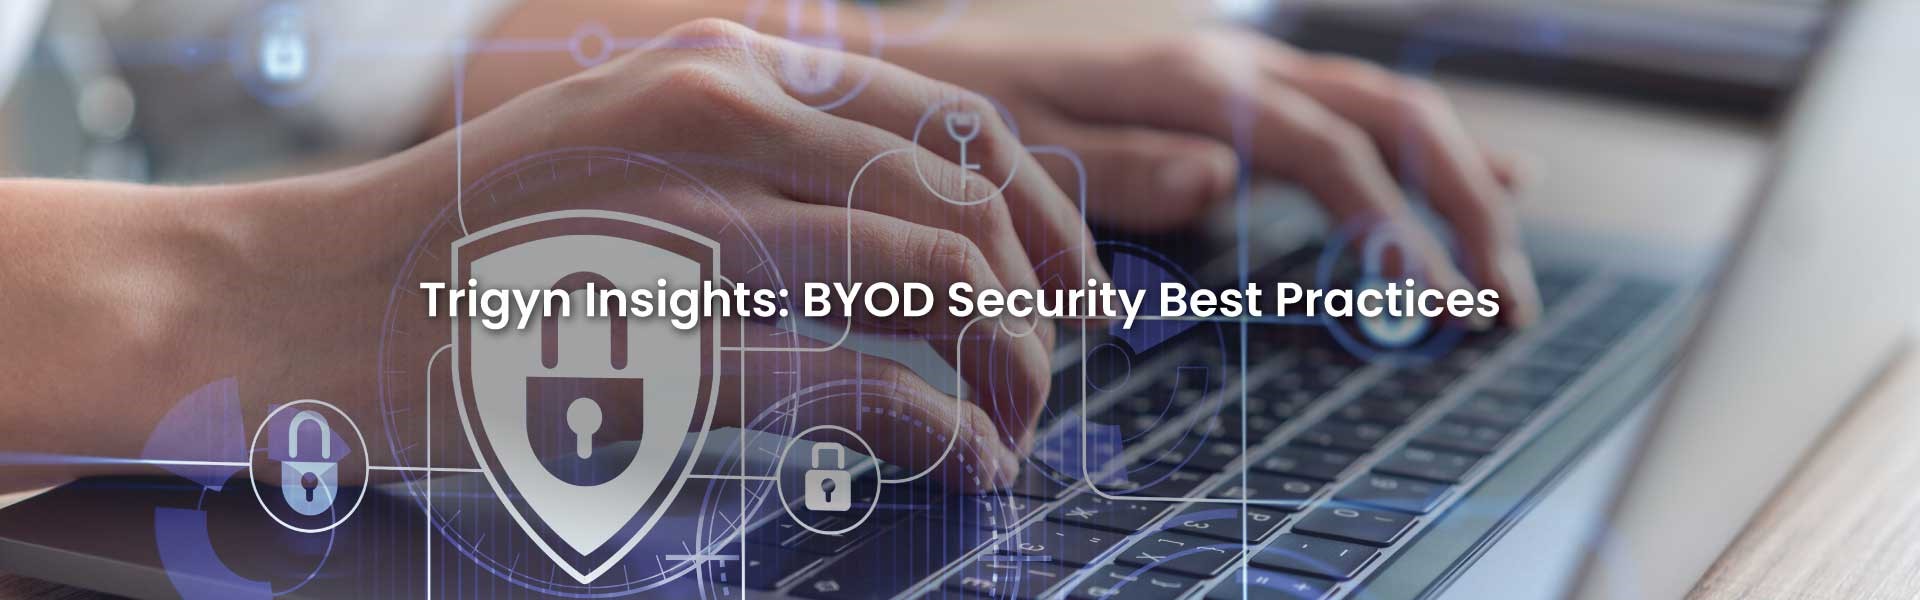 BYOD Security Best Practices